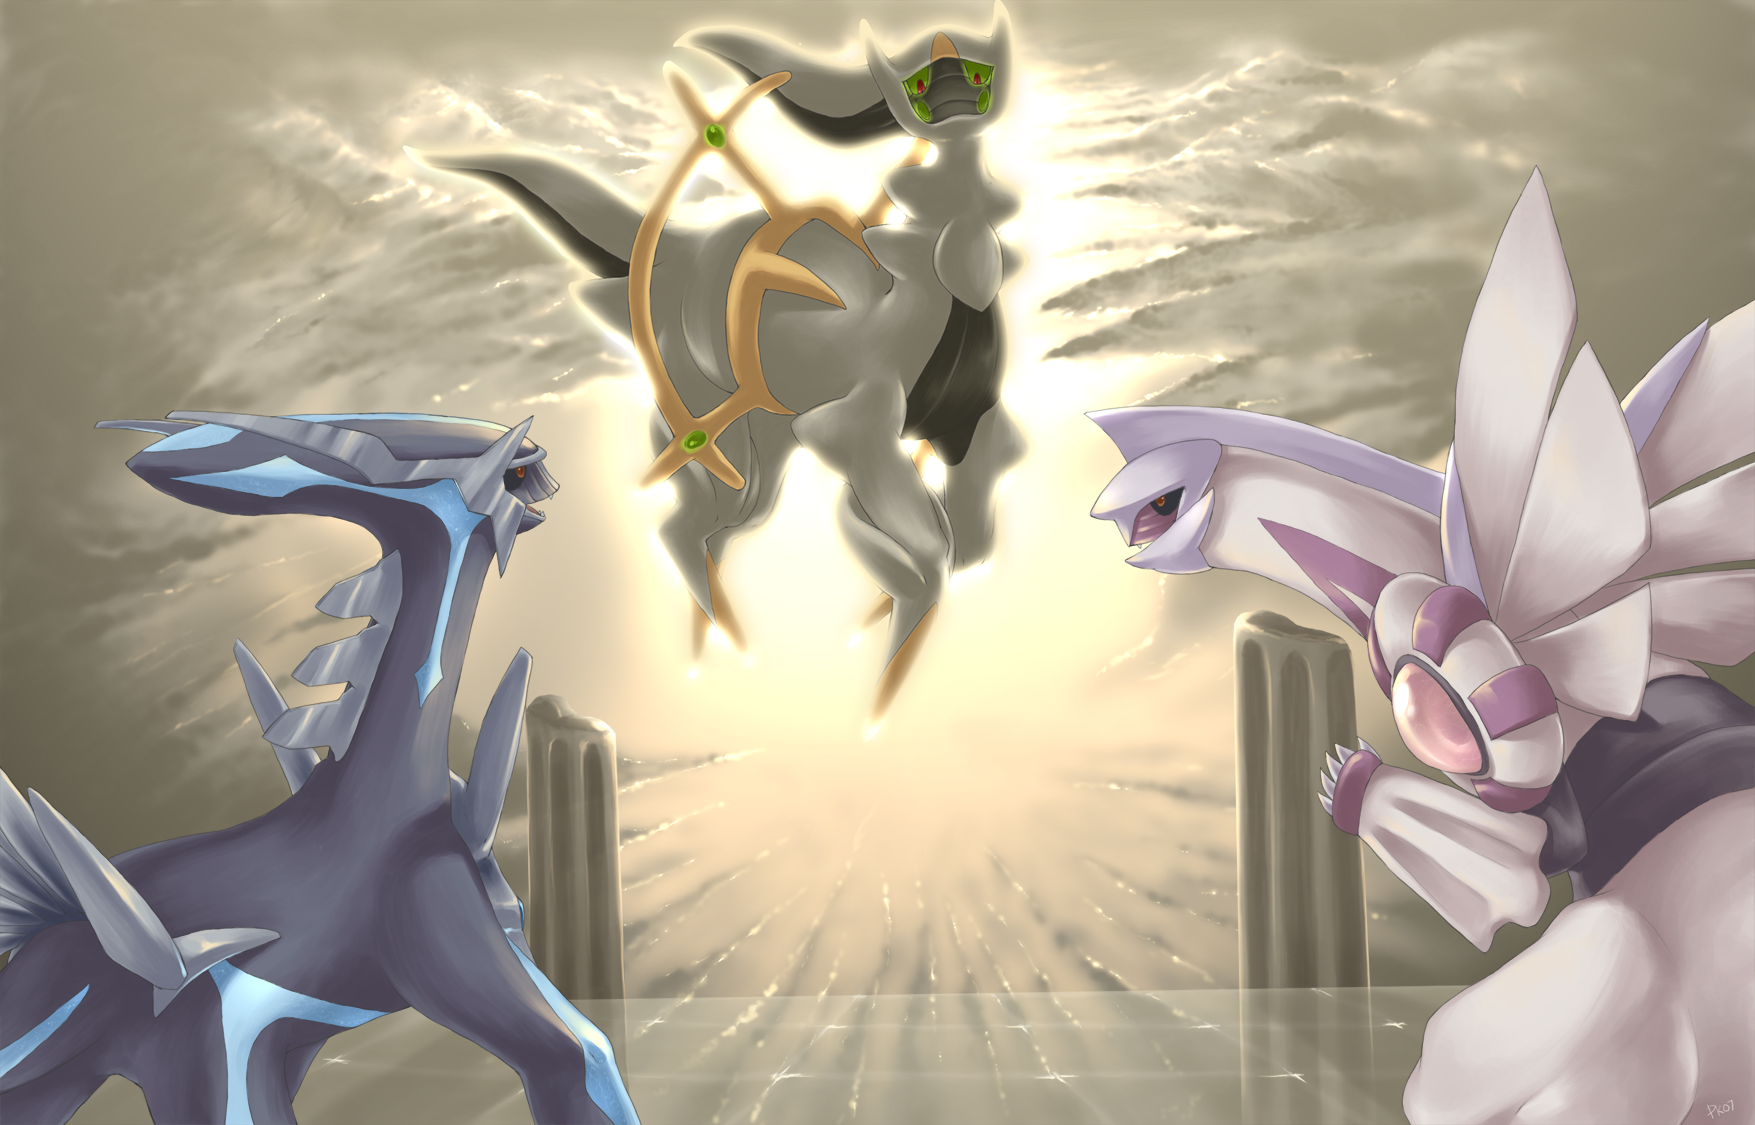 http://static1.wikia.nocookie.net/__cb20130616163917/spinpasta/images/4/45/Beginning_Dimension_Arceus_by_purplekecleon.png